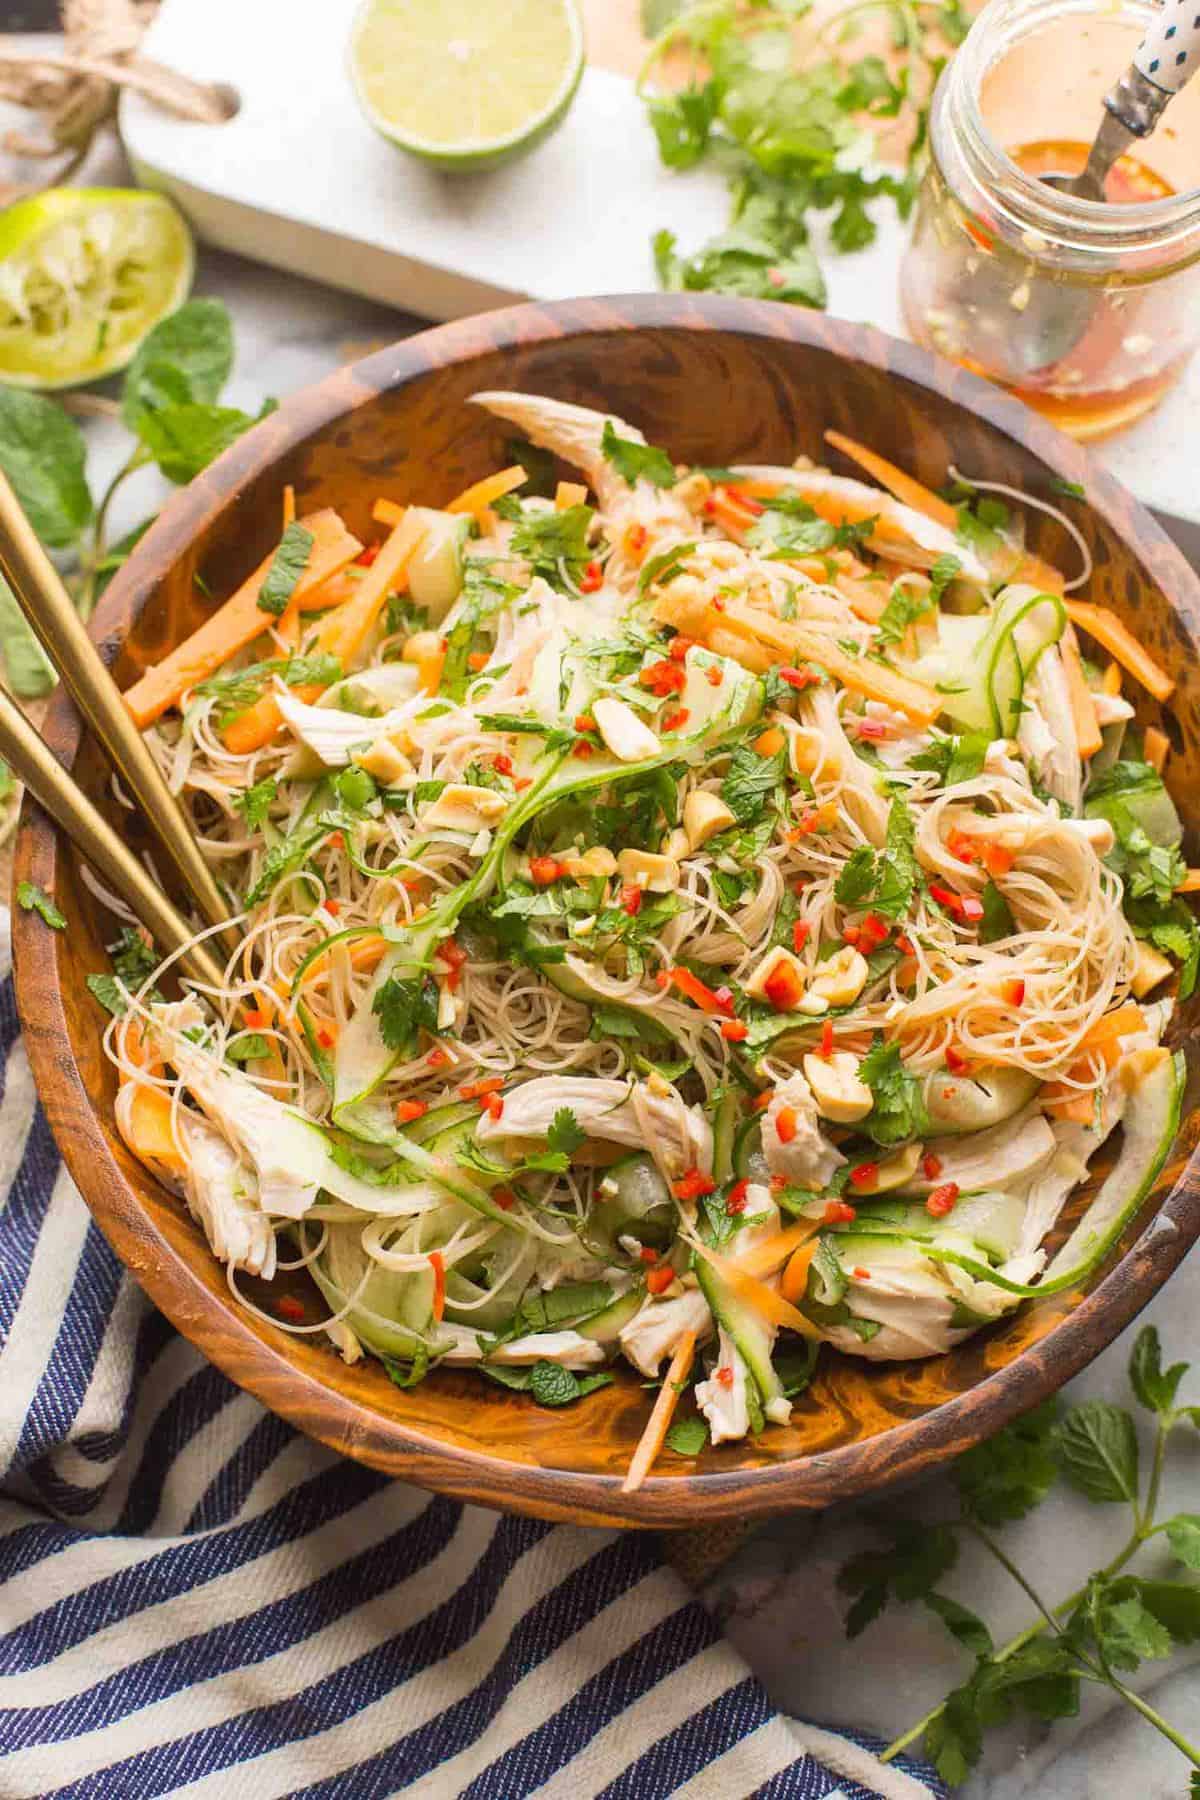 Vietnamese Chicken And Rice Noodle Salad 2 